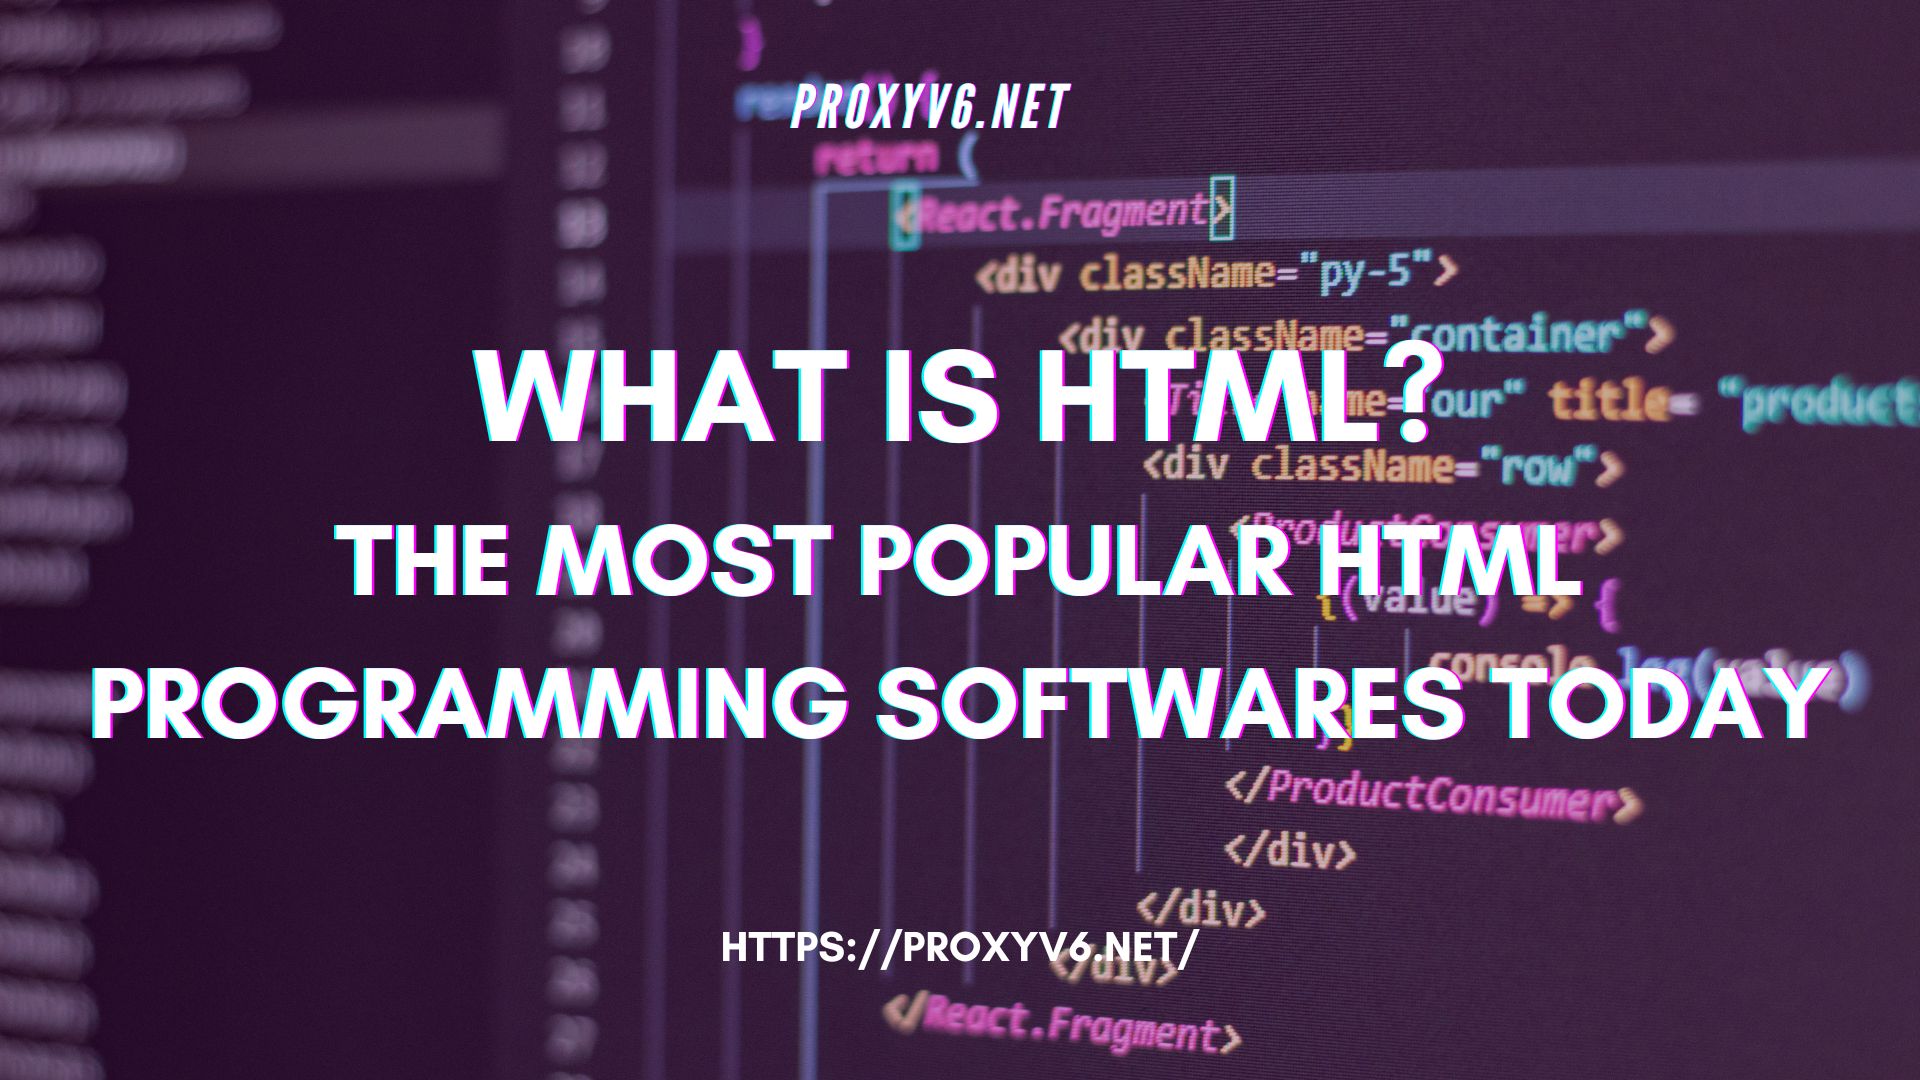 What is HTML? The most popular HTML programming softwares today